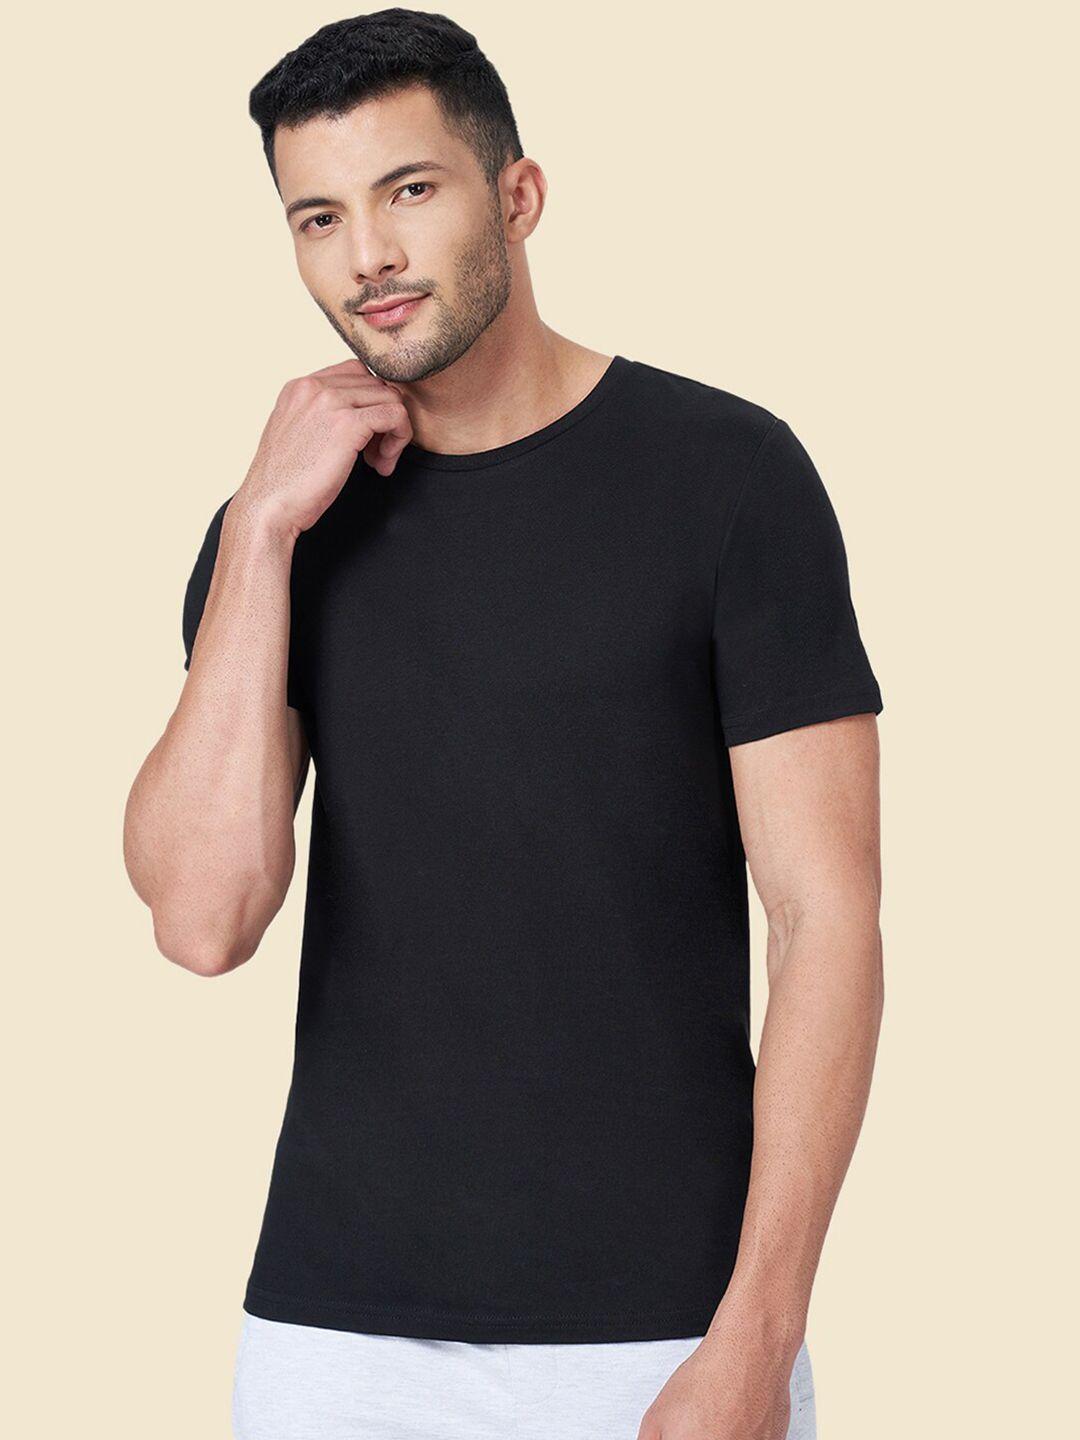 ajile-by-pantaloons-round-neck-short-sleeves-slim-fit-cotton-t-shirt